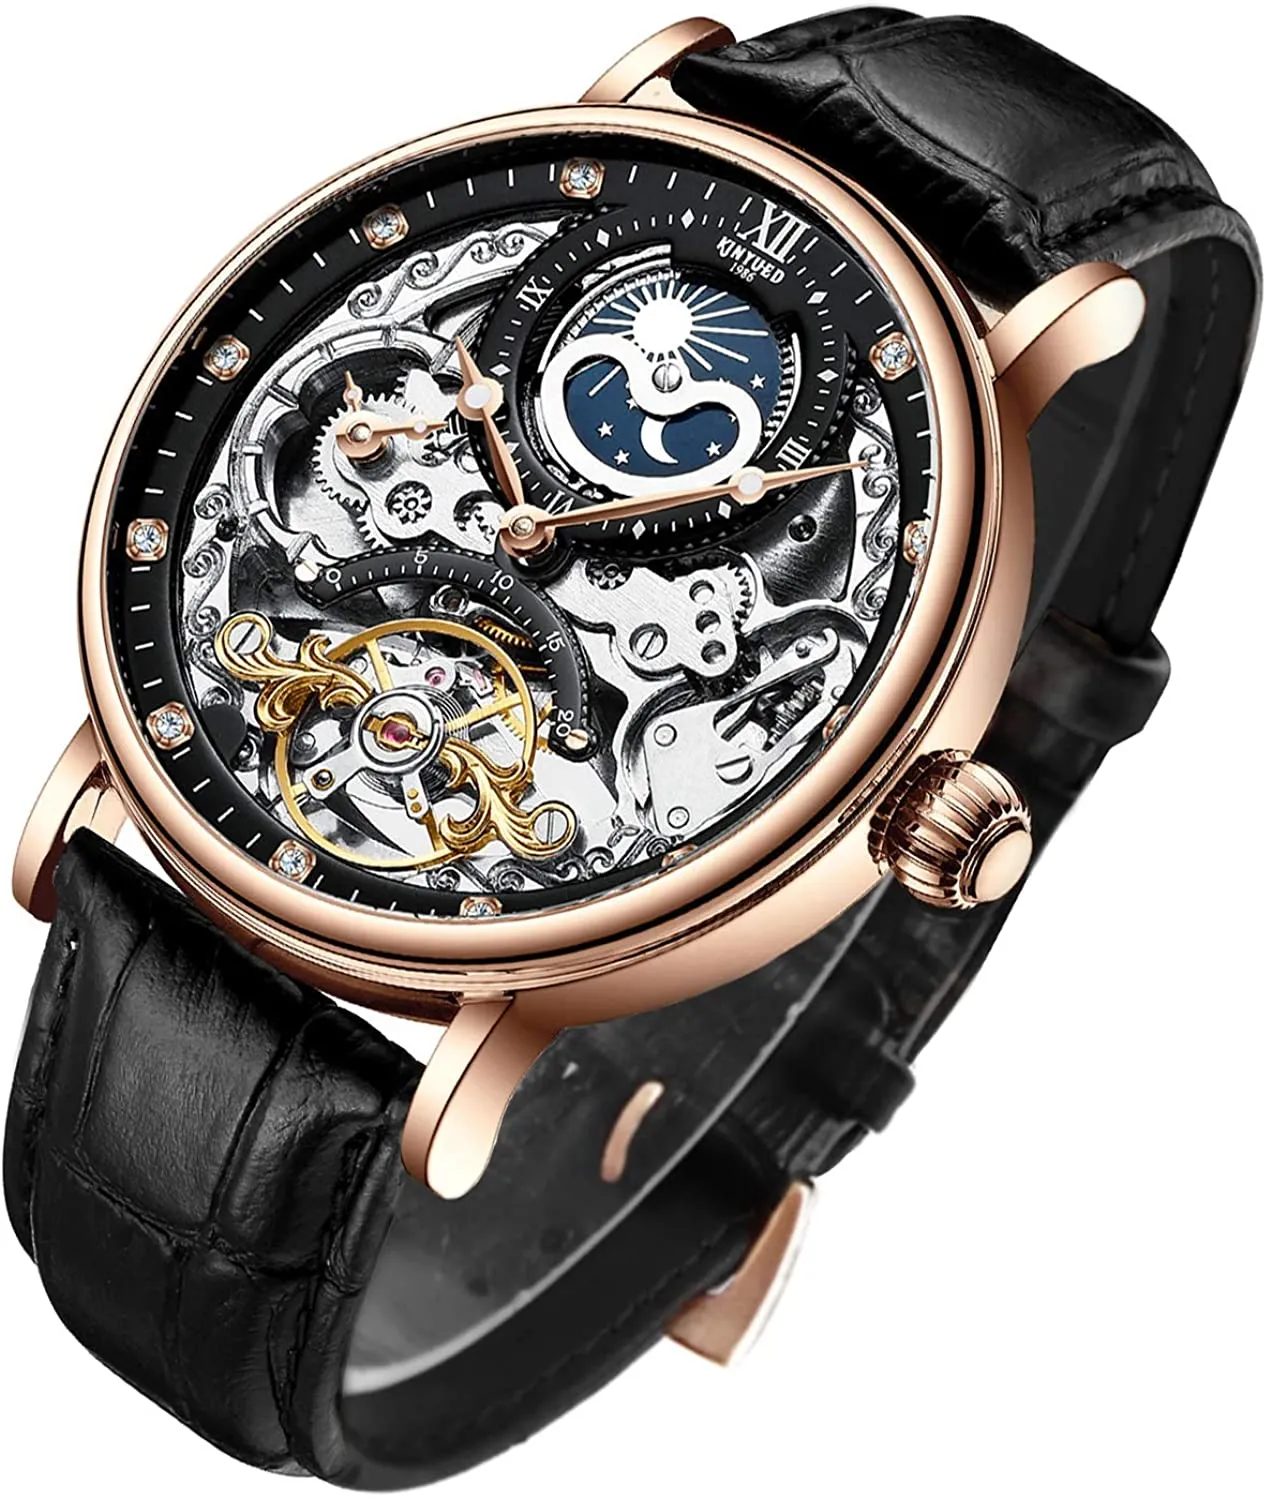 Mens Luxury Skeleton Automatic Mechanical Wrist Watches Leather Moon Frase Luminous Hands Self-Wind Wristwatch266a